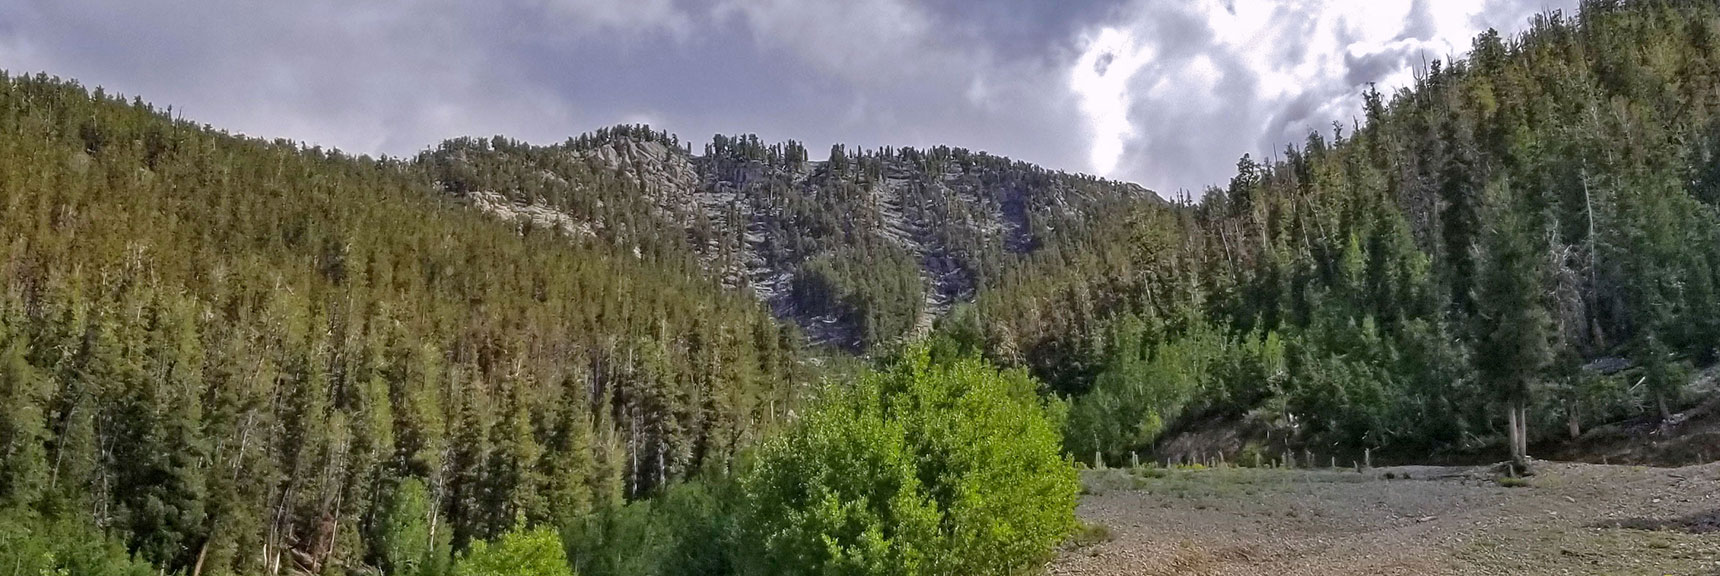 View Up the Ski Run to the Plateau at the Summit of the Lee/Kyle Canyon Upper Rim. | Lee Peak Summit via Lee Canyon Mid Ridge | Mt. Charleston Wilderness | Spring Mountains, Nevada